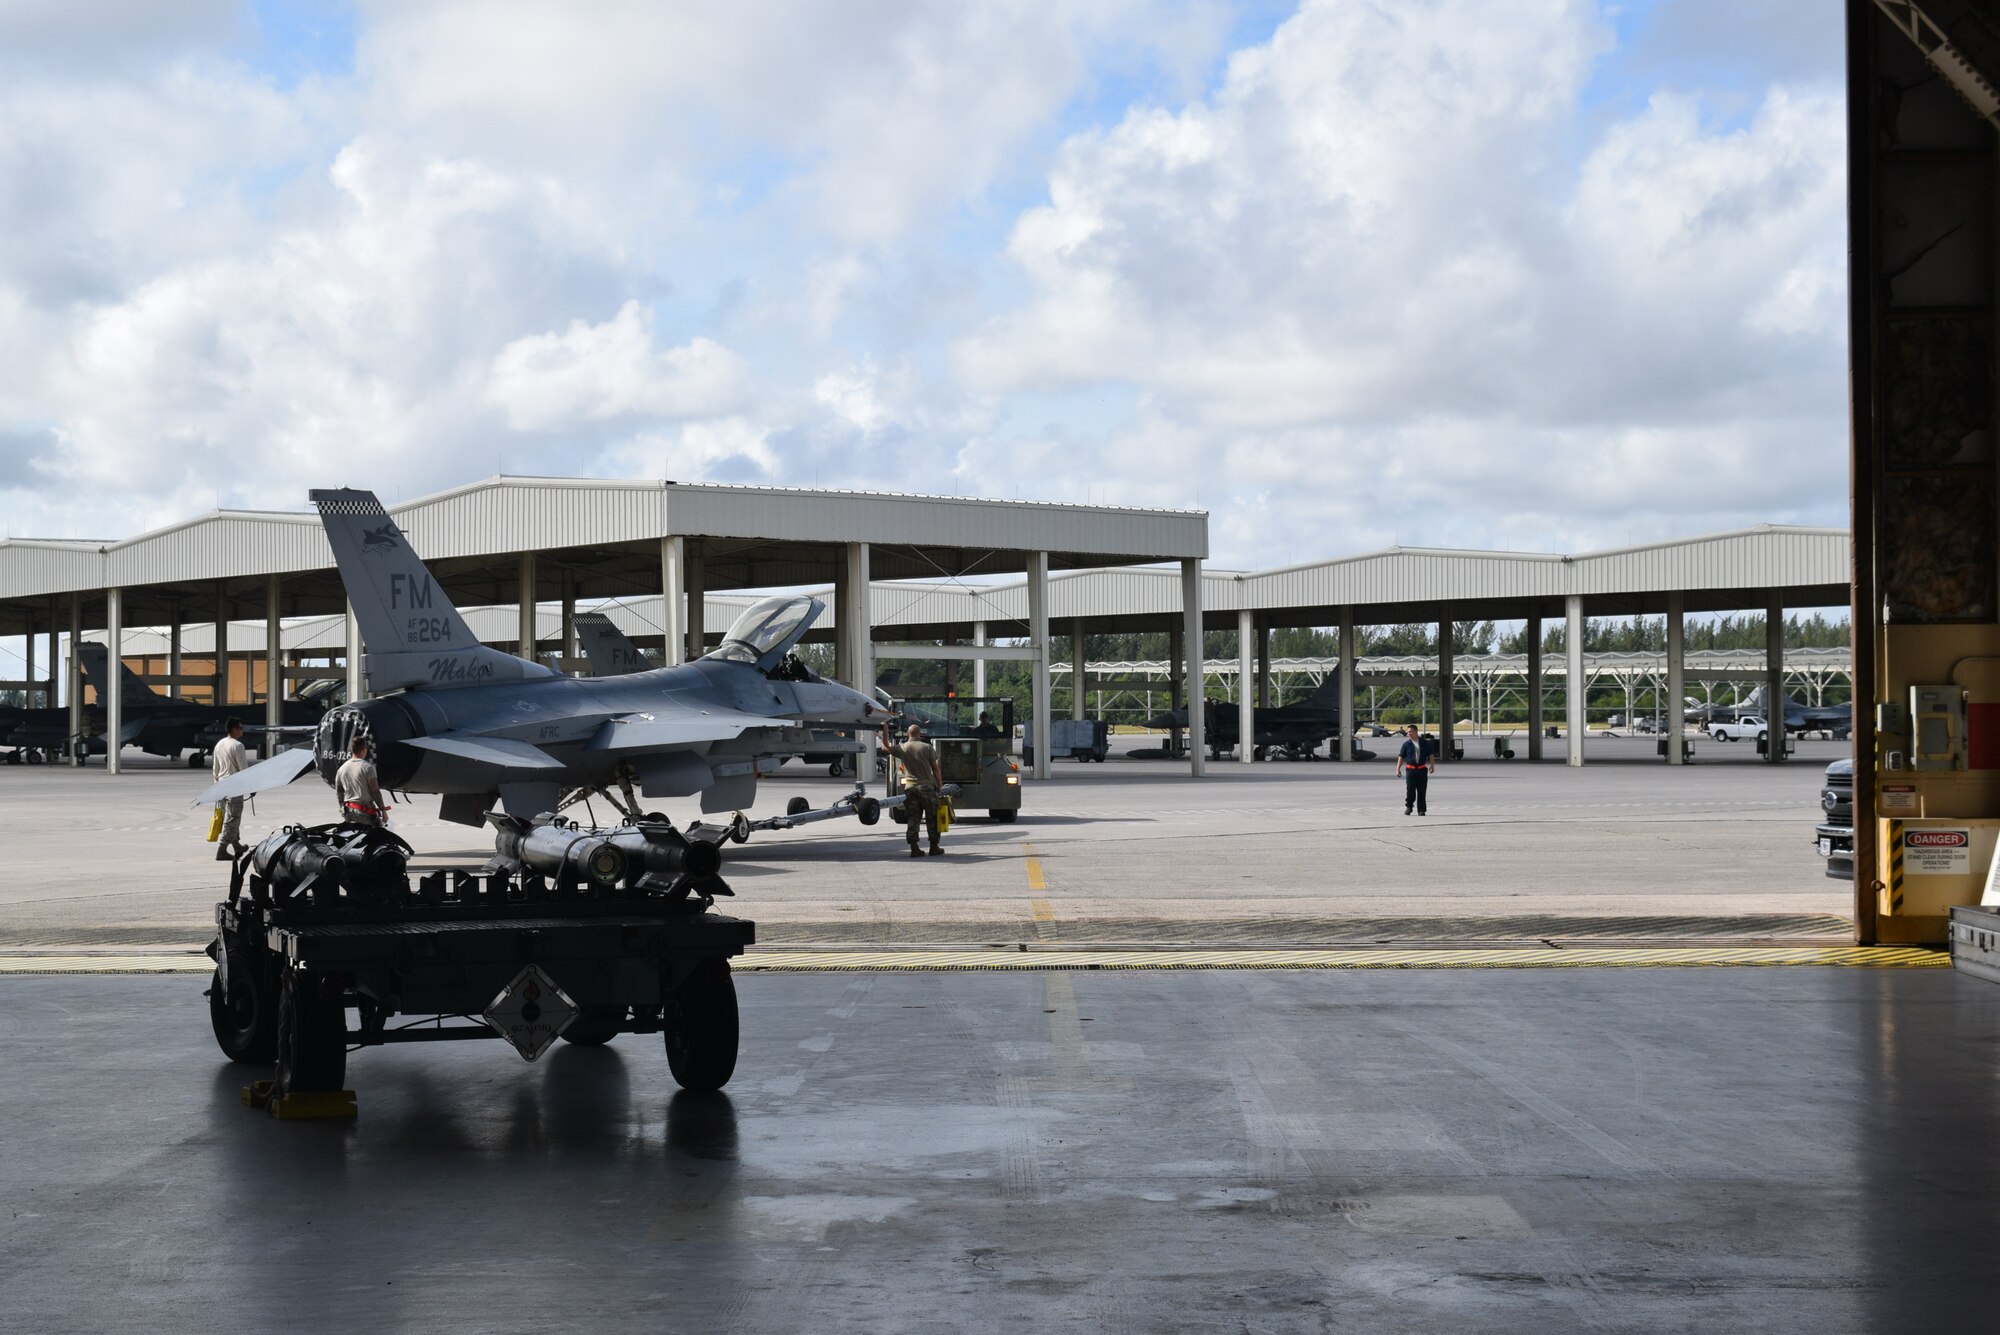 Members of the 926th Aircraft Maintenance Squadron provide maintenance support to the 482nd Fighter Wing, Homestead Air Reserve Base, Florida, Dec. 6-19, 2020. The 12 maintainers have been working at Homestead ARB in support of the 482nd’s upcoming deployment.